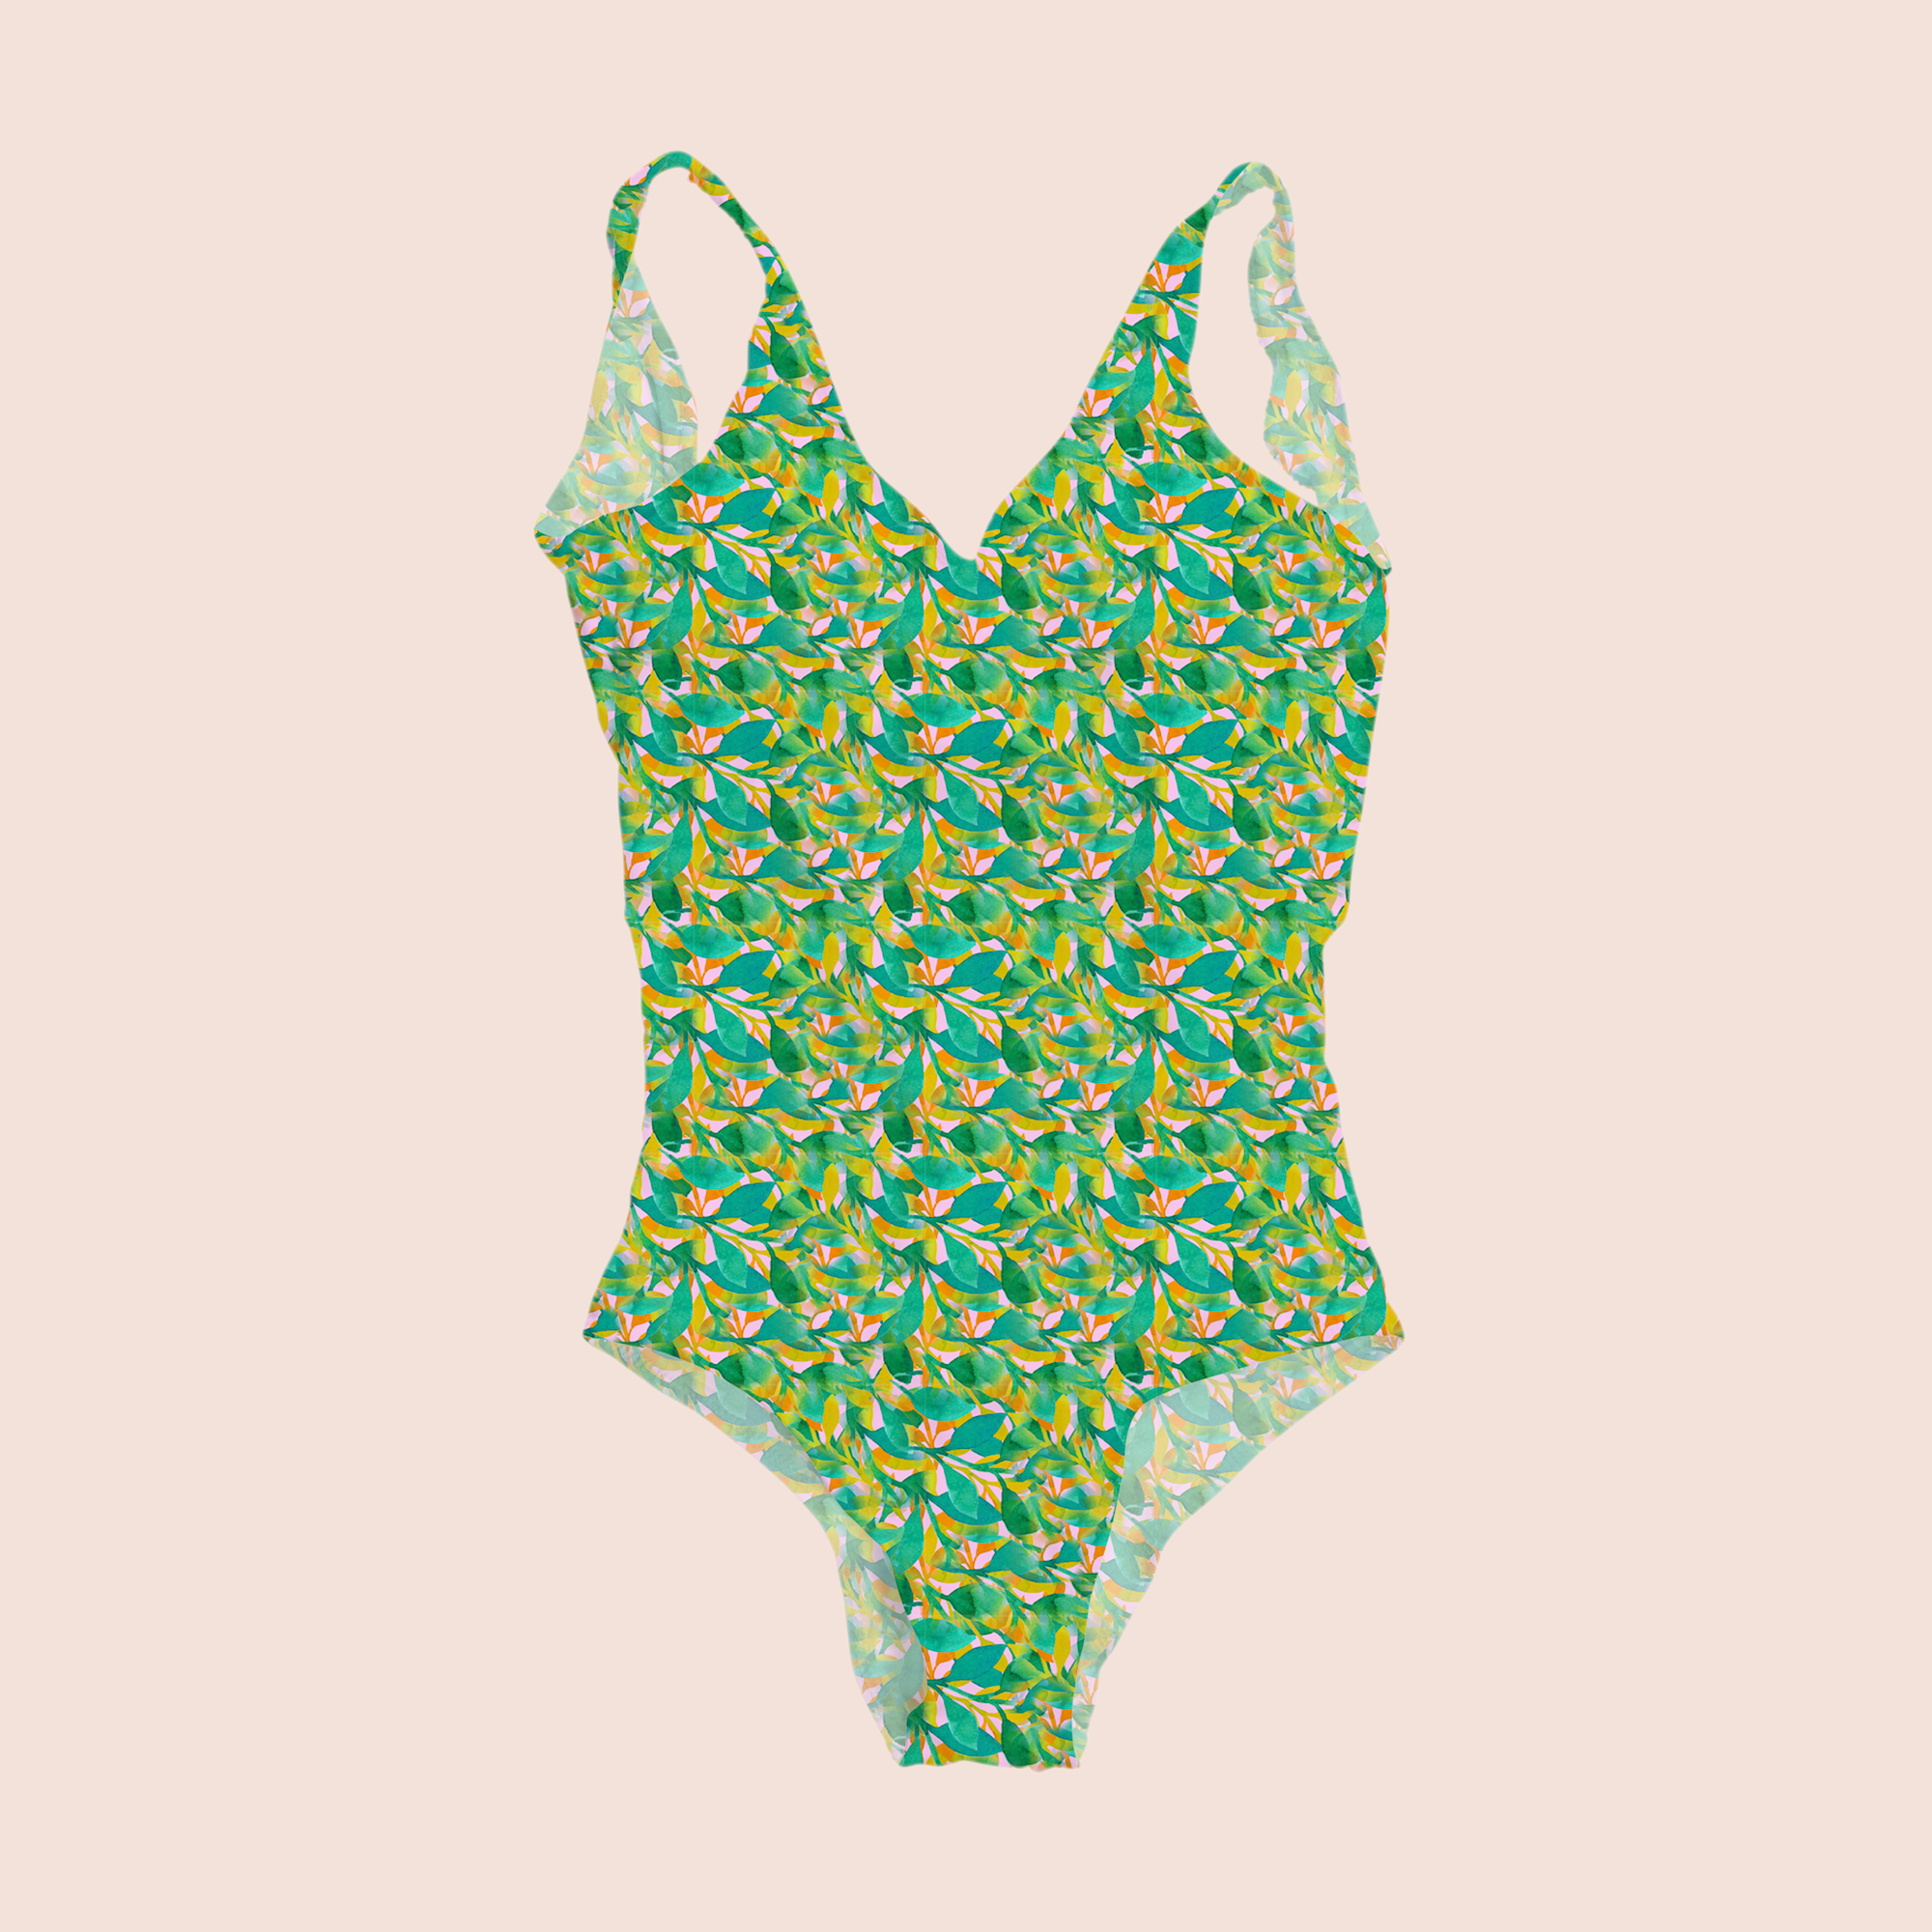 Tropical feel in green pattern design printed on recycled fabric swimwear